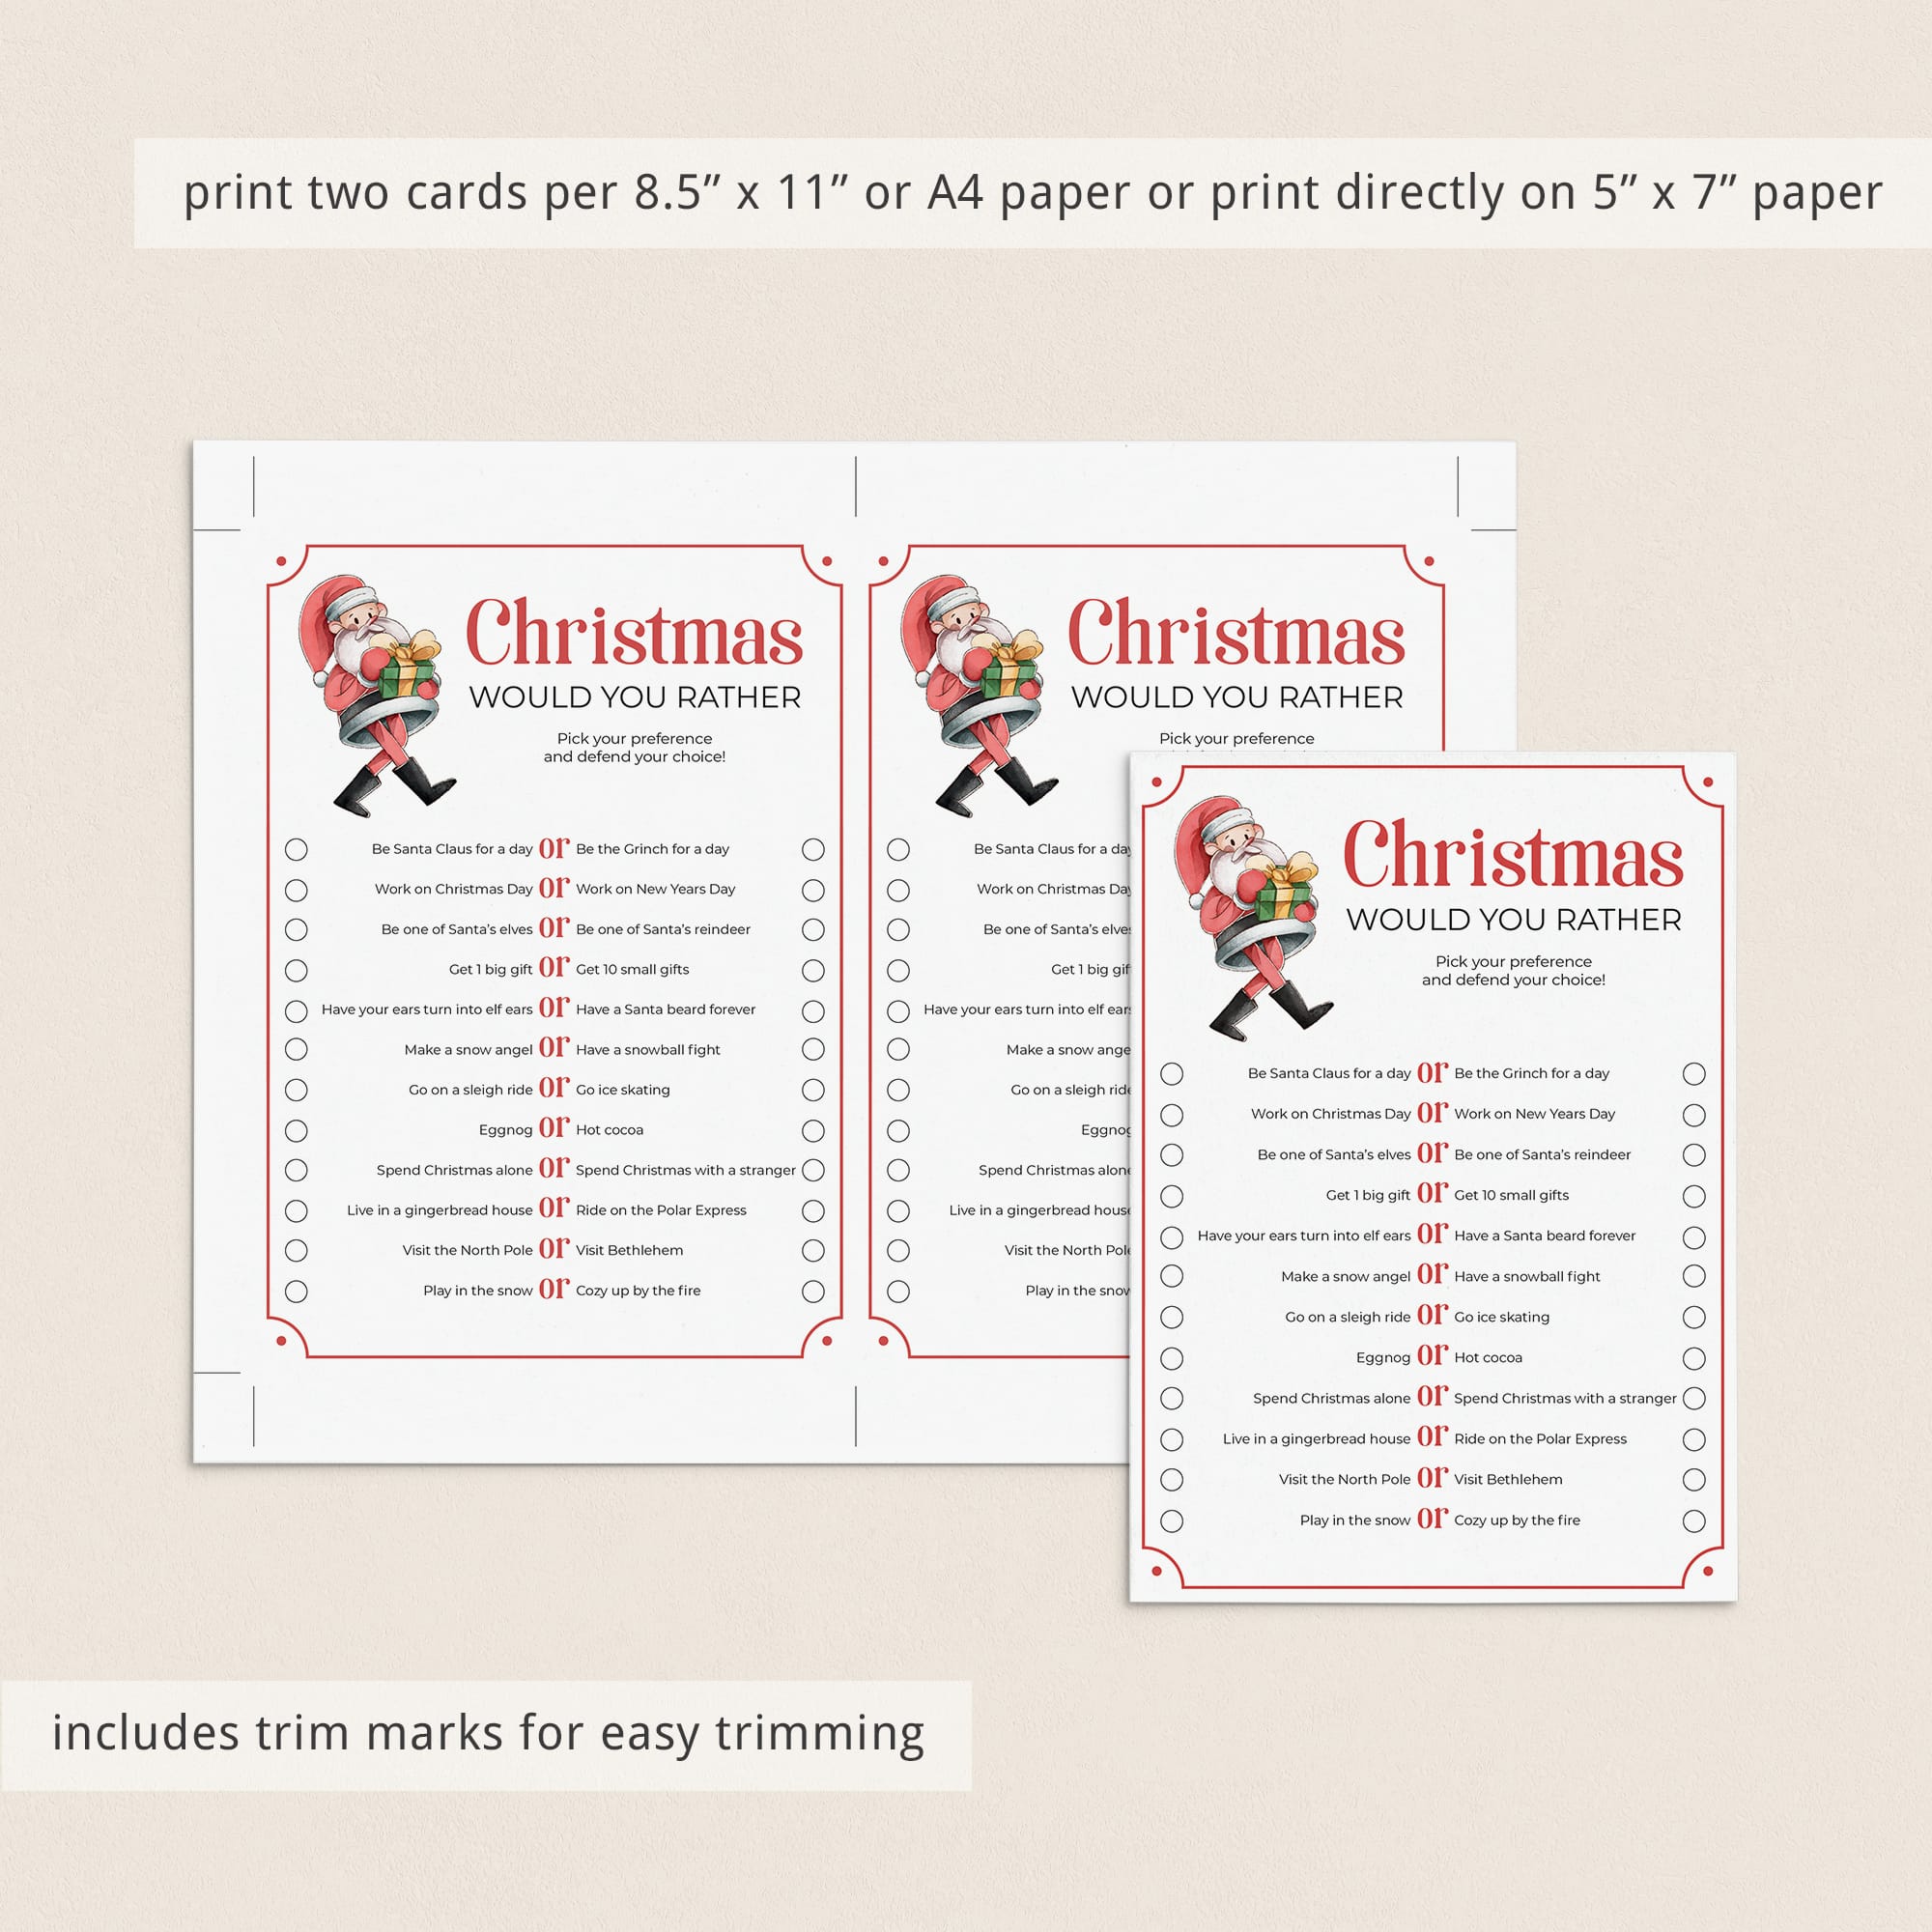 Christmas party icebreaker would you rather questions printable â